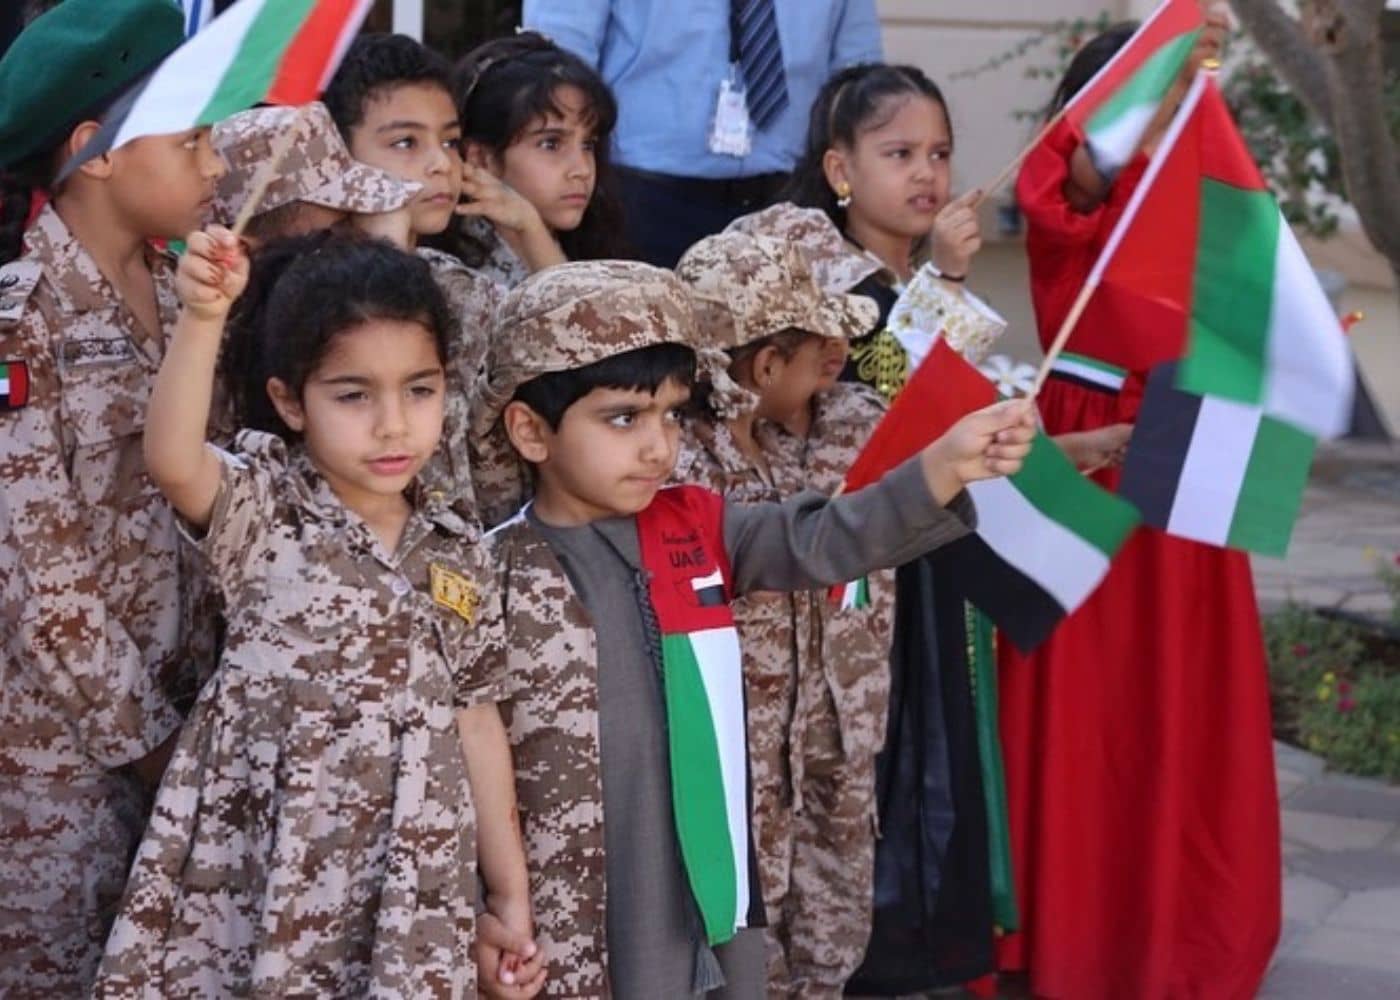 Students of Abu Dhabi International School at the Commemoration Day event